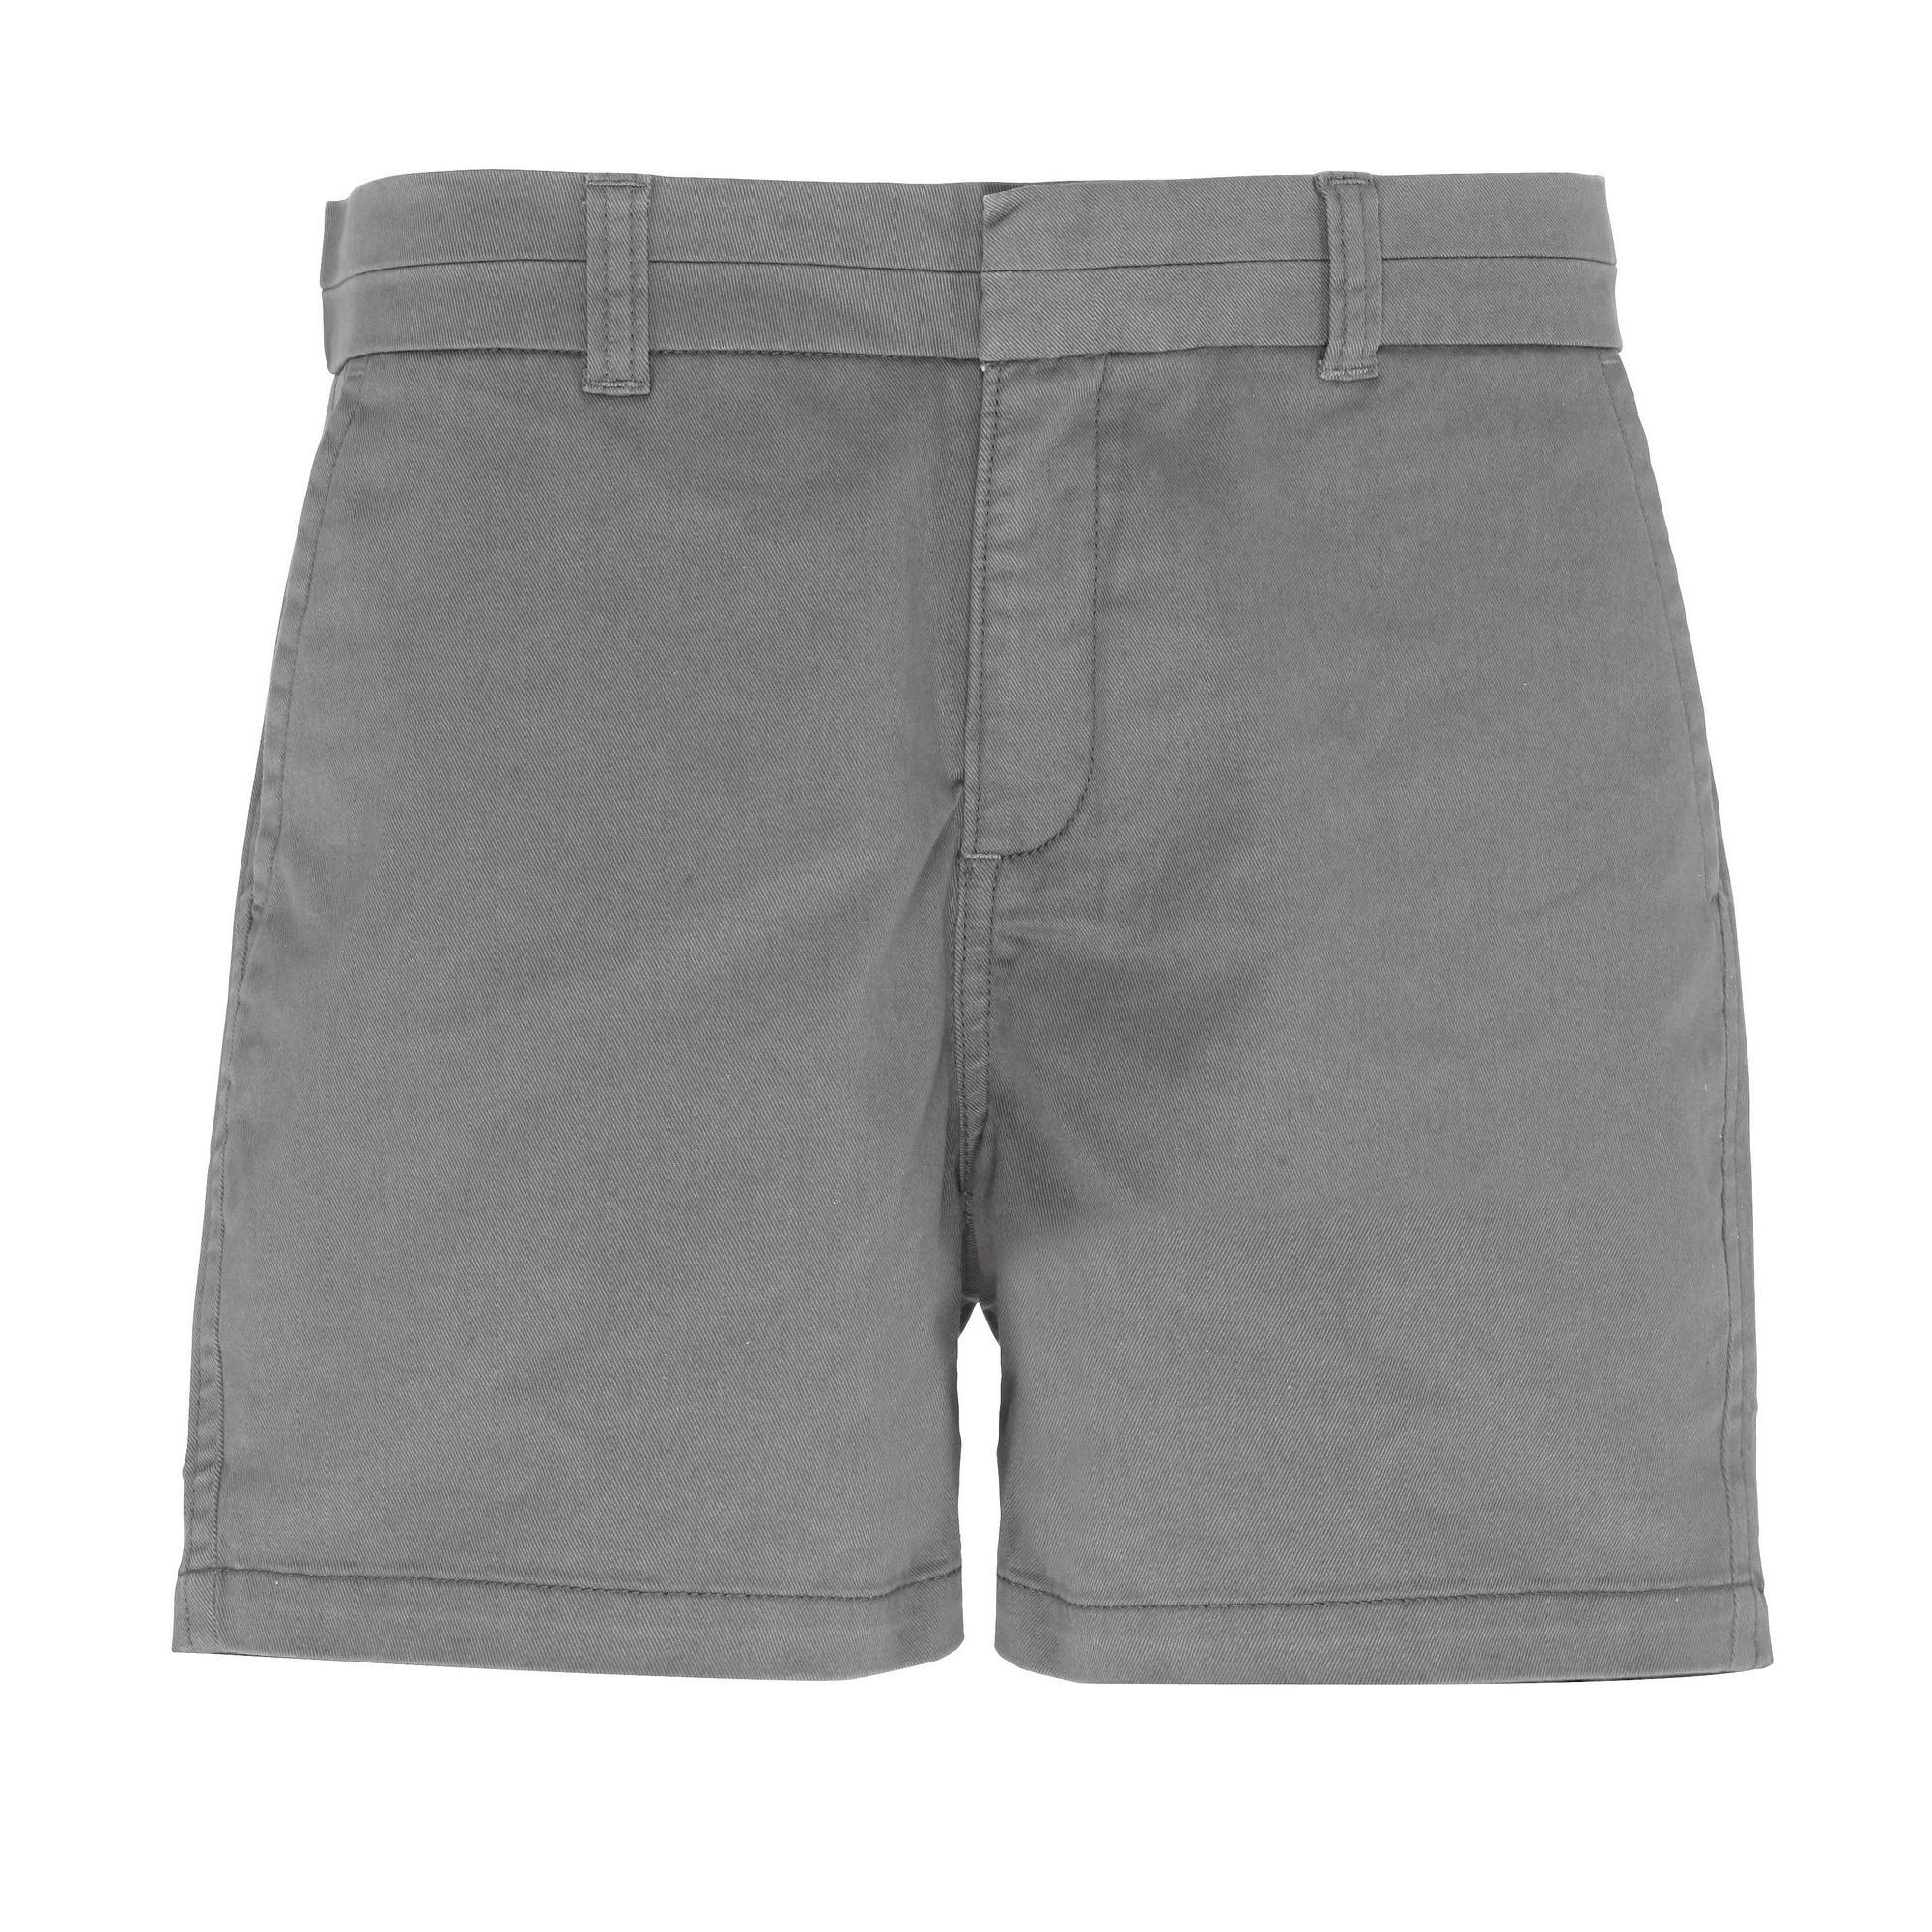 Asquith & Fox Womens/Ladies Classic Fit Shorts (Slate) (M)